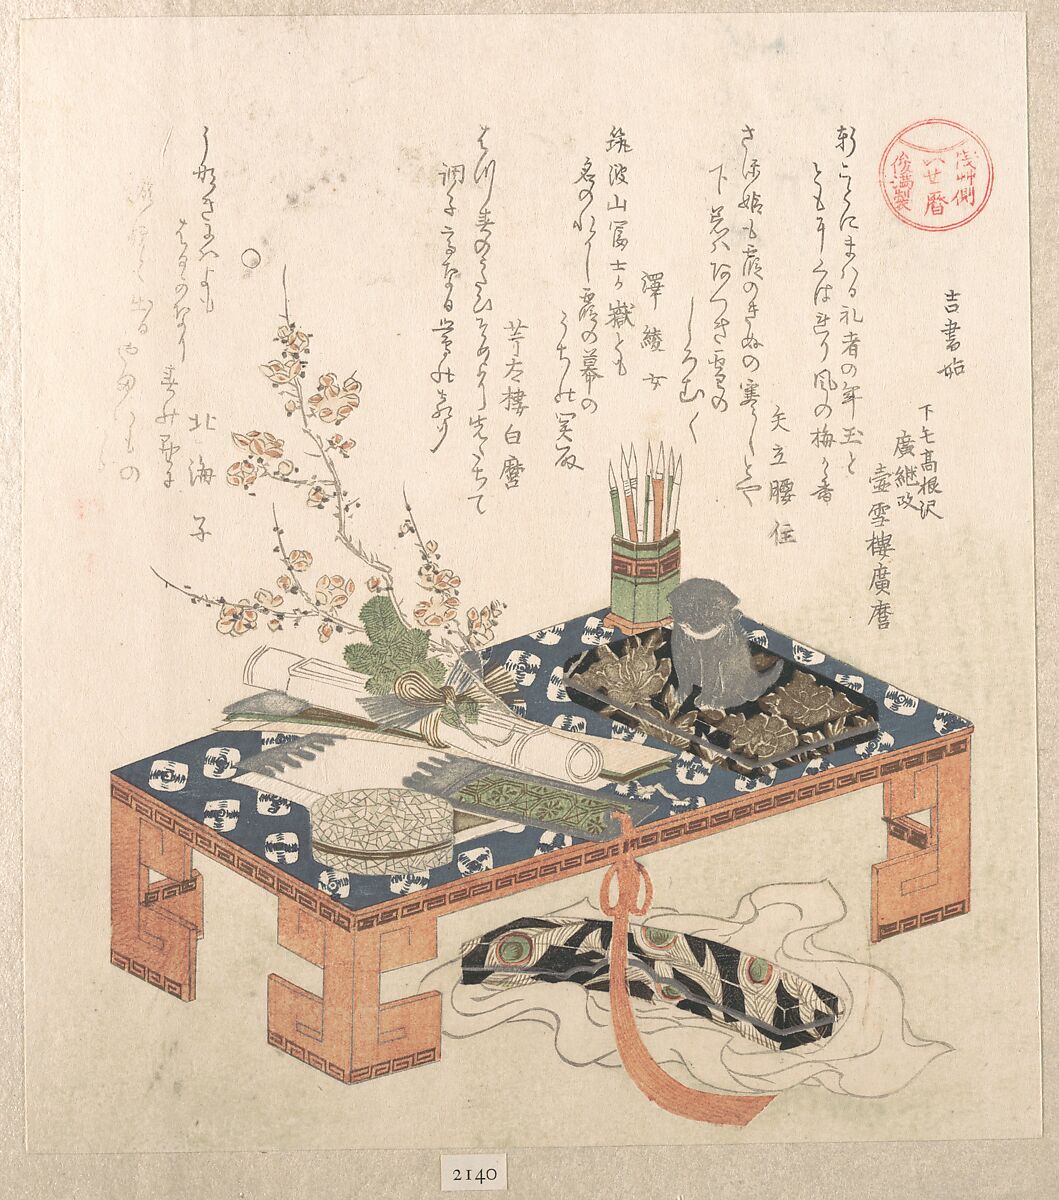 “Desk with Writing Set and Plum Flowers,” from the series Ise Calendars for the Asakusa Group (Asakusa-gawa Ise goyomi)
From the Spring Rain Collection (Harusame shū), vol. 2, Kubo Shunman (Japanese, 1757–1820) (?), Woodblock print (surimono); ink and color on paper, Japan 